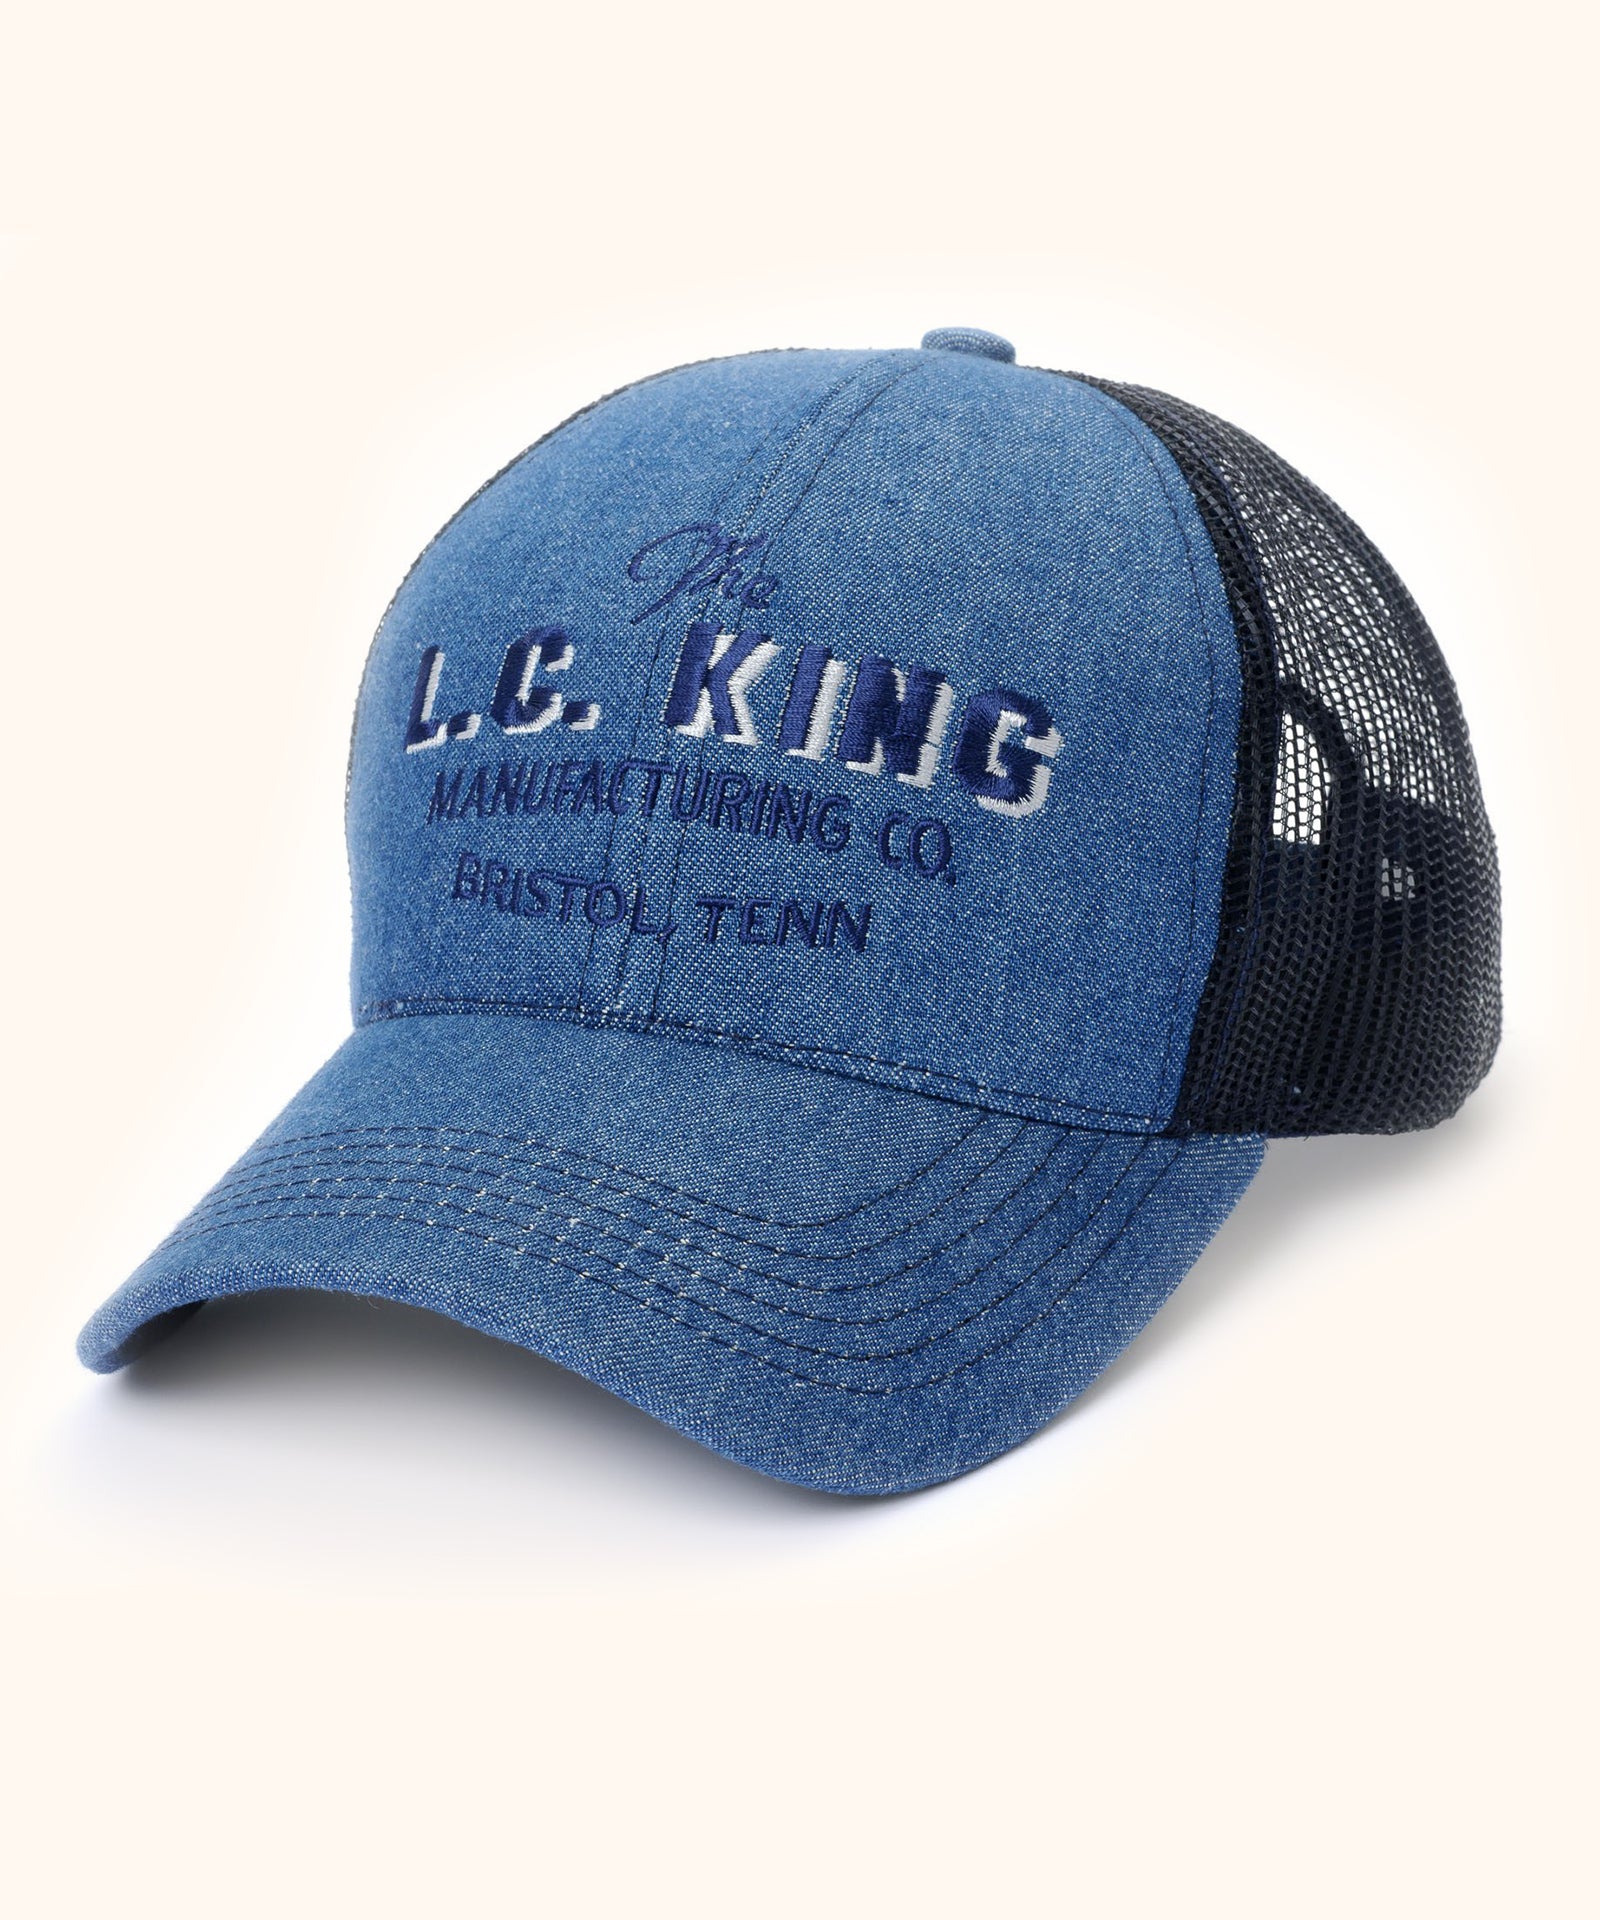 LC King Cap with Mesh Back